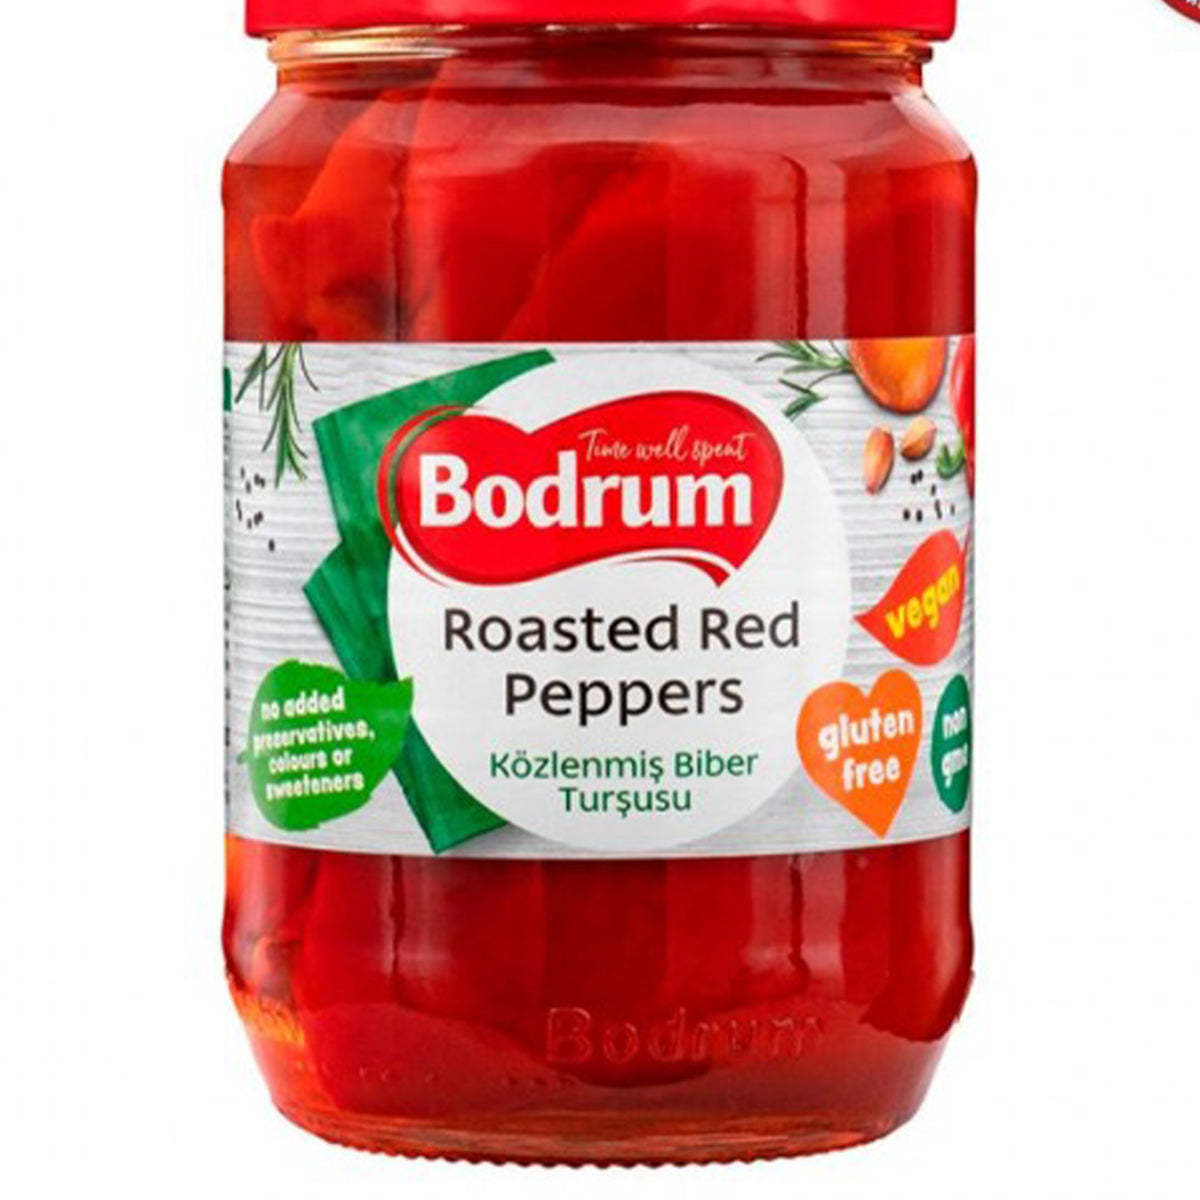 A jar of Bodrum - Roasted Red Peppers - 670g.